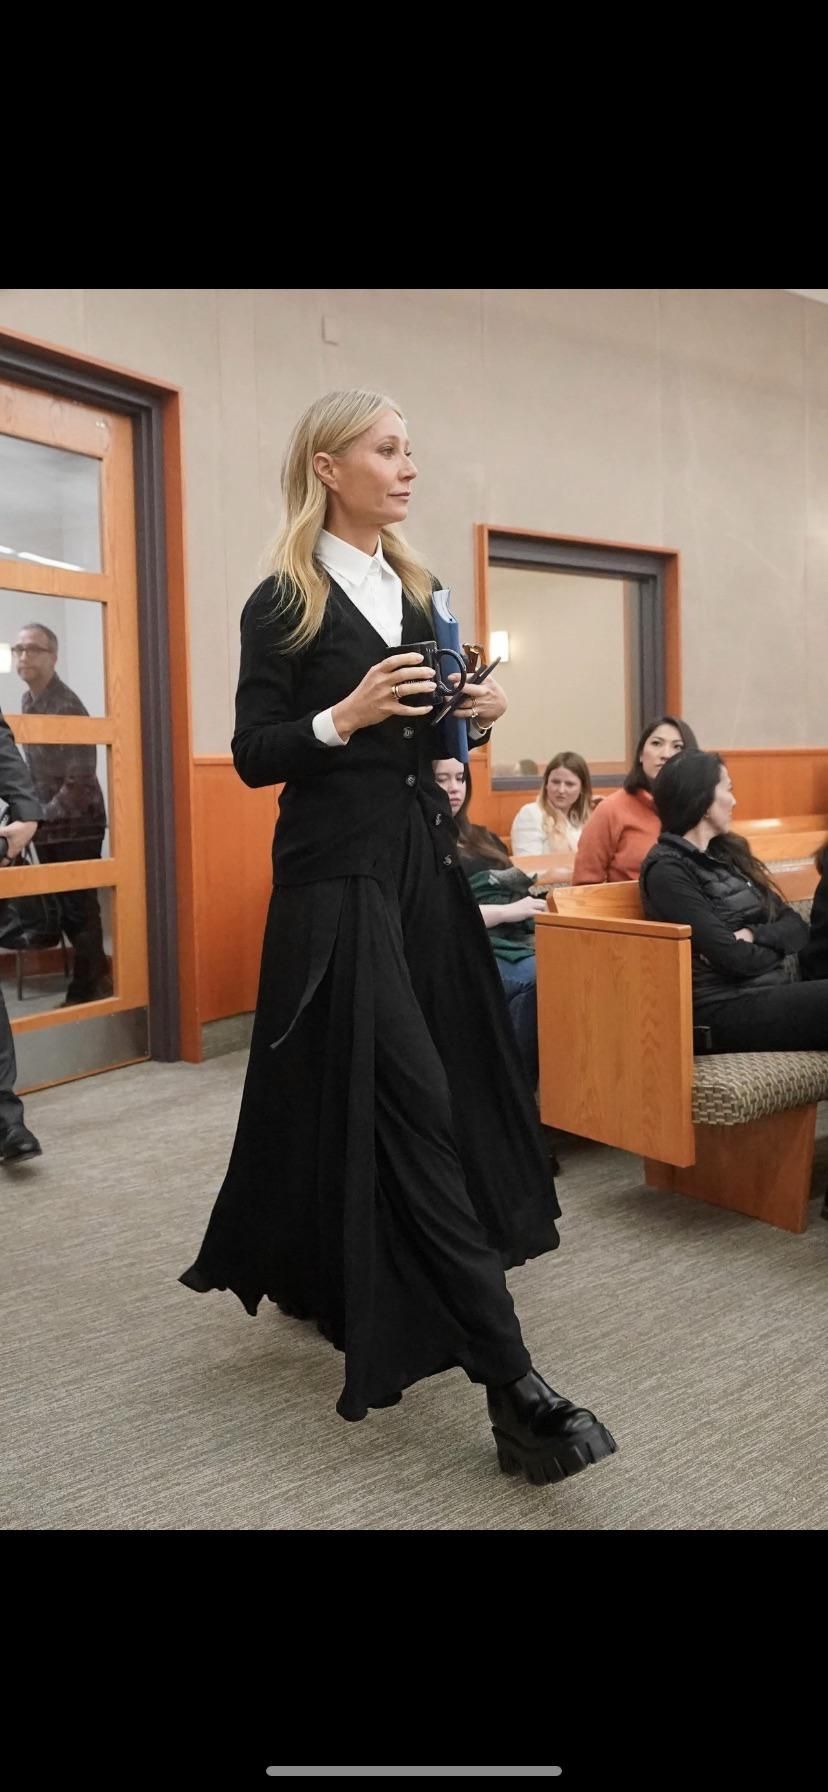 Abigale Williams entering the Salem courthouse in 1692, colourized.